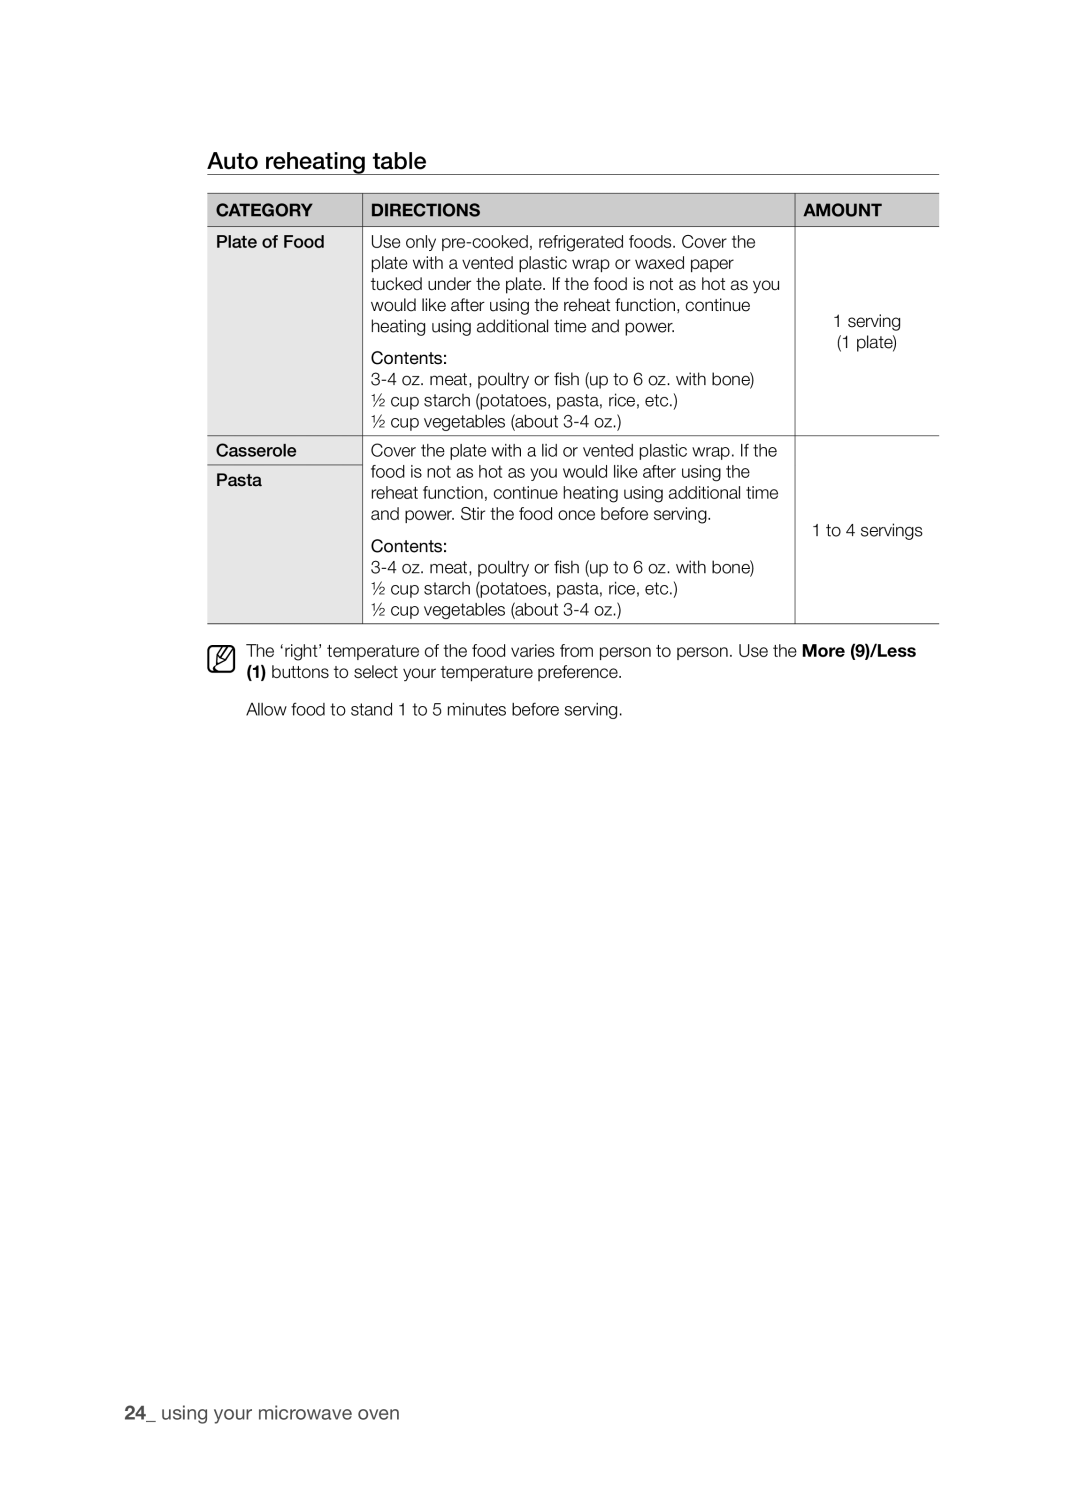 Samsung SMH9151B user manual Auto reheating table, using your microwave oven, Category, Directions, Amount 